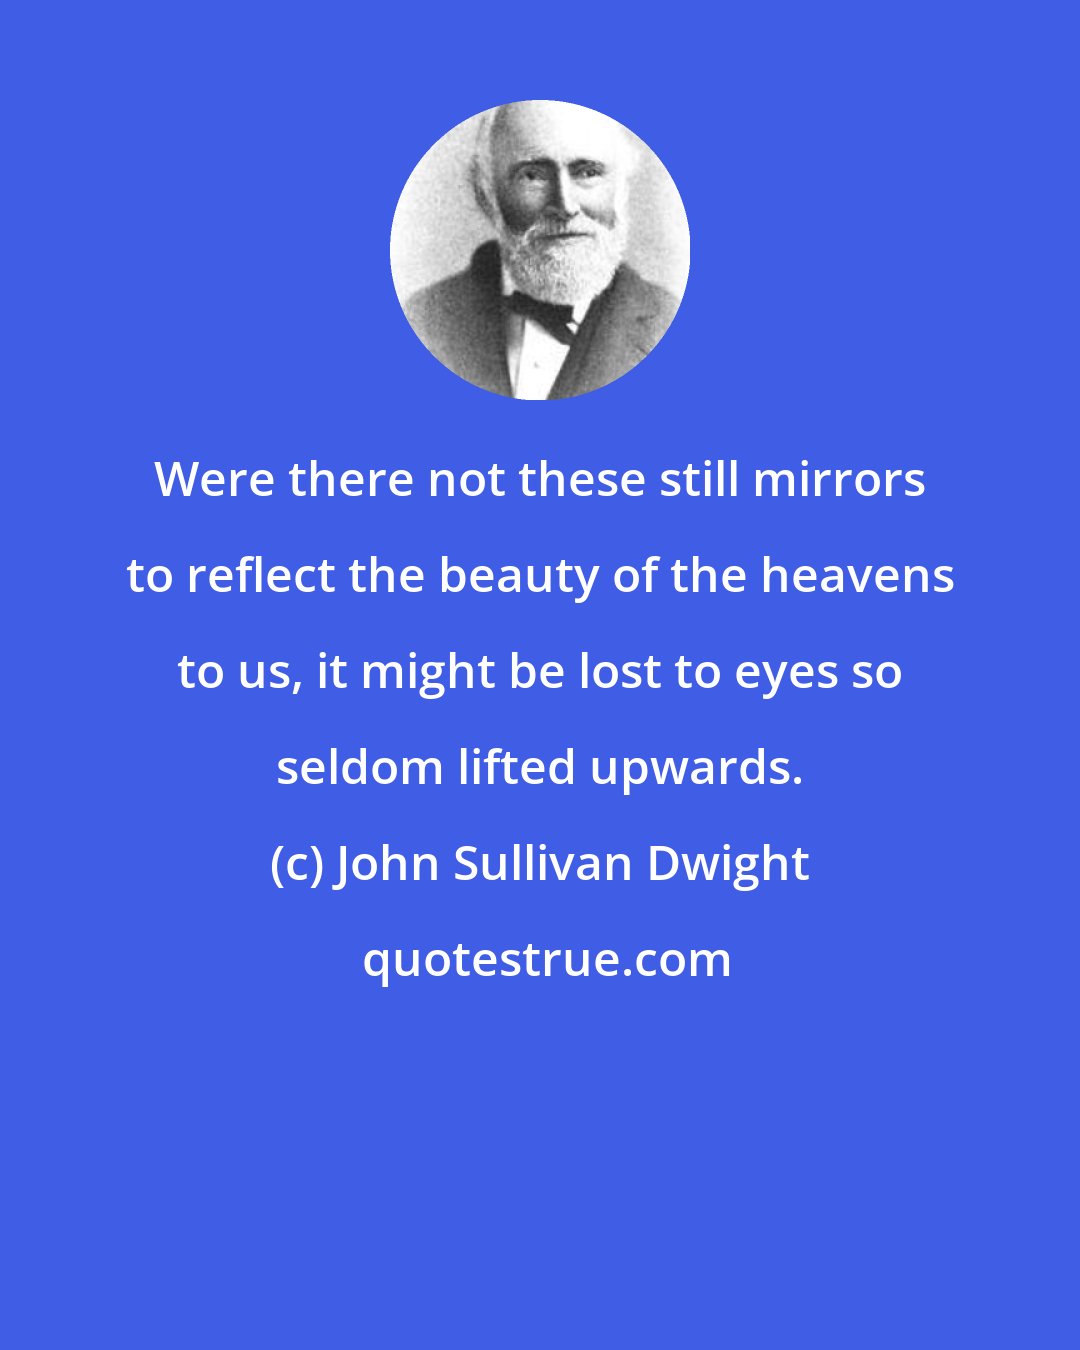 John Sullivan Dwight: Were there not these still mirrors to reflect the beauty of the heavens to us, it might be lost to eyes so seldom lifted upwards.